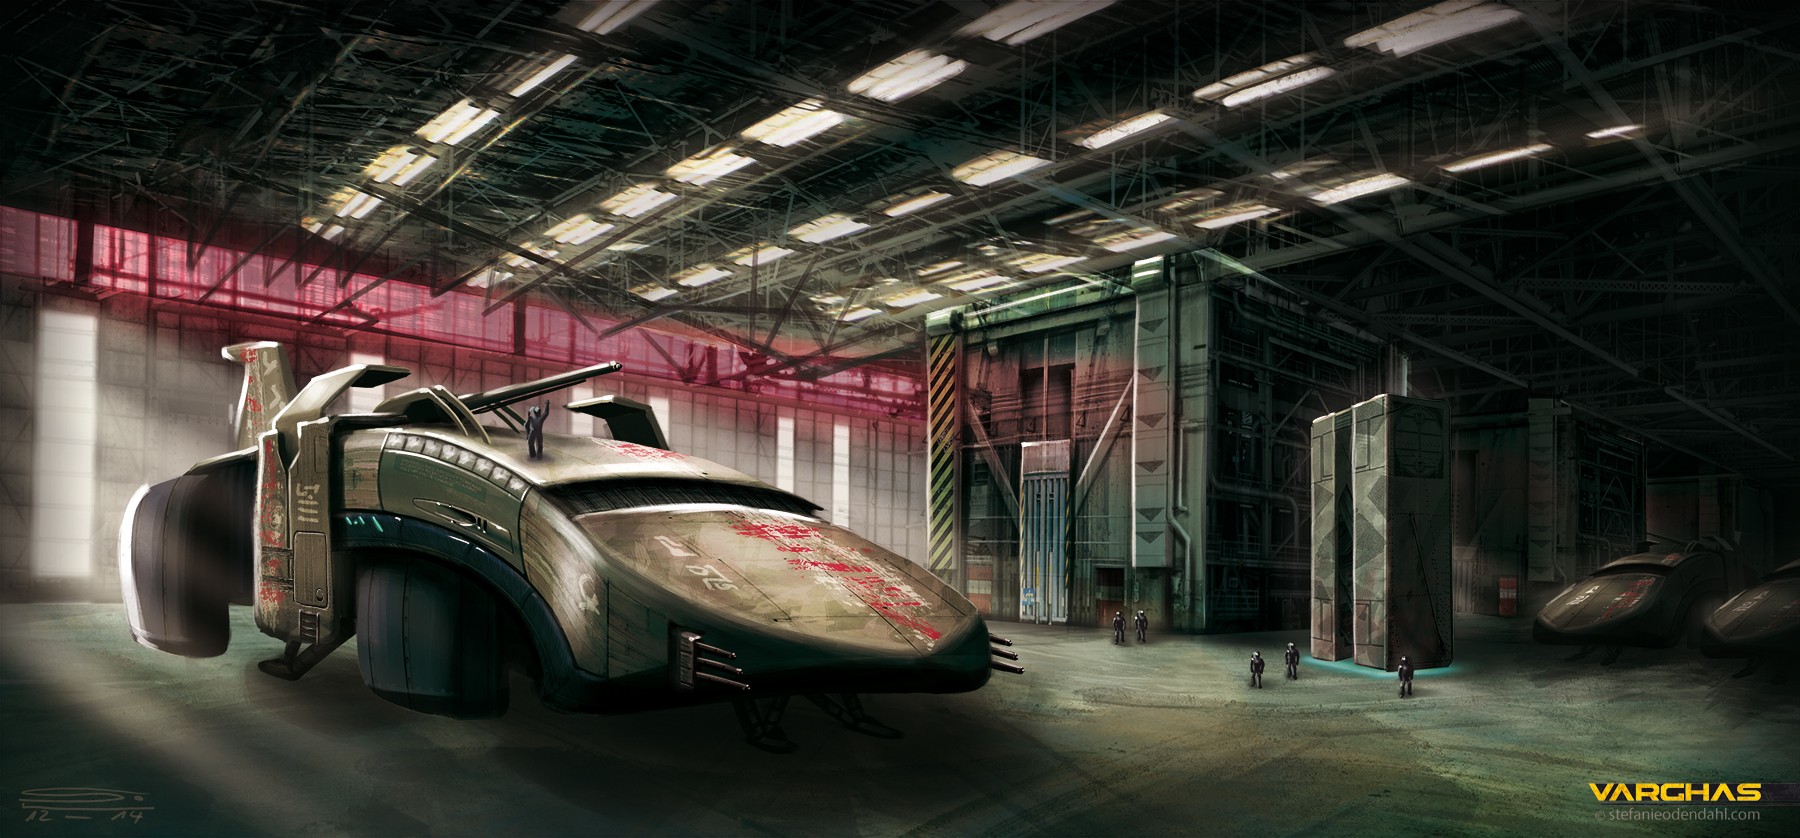 General 1800x838 science fiction artwork vehicle